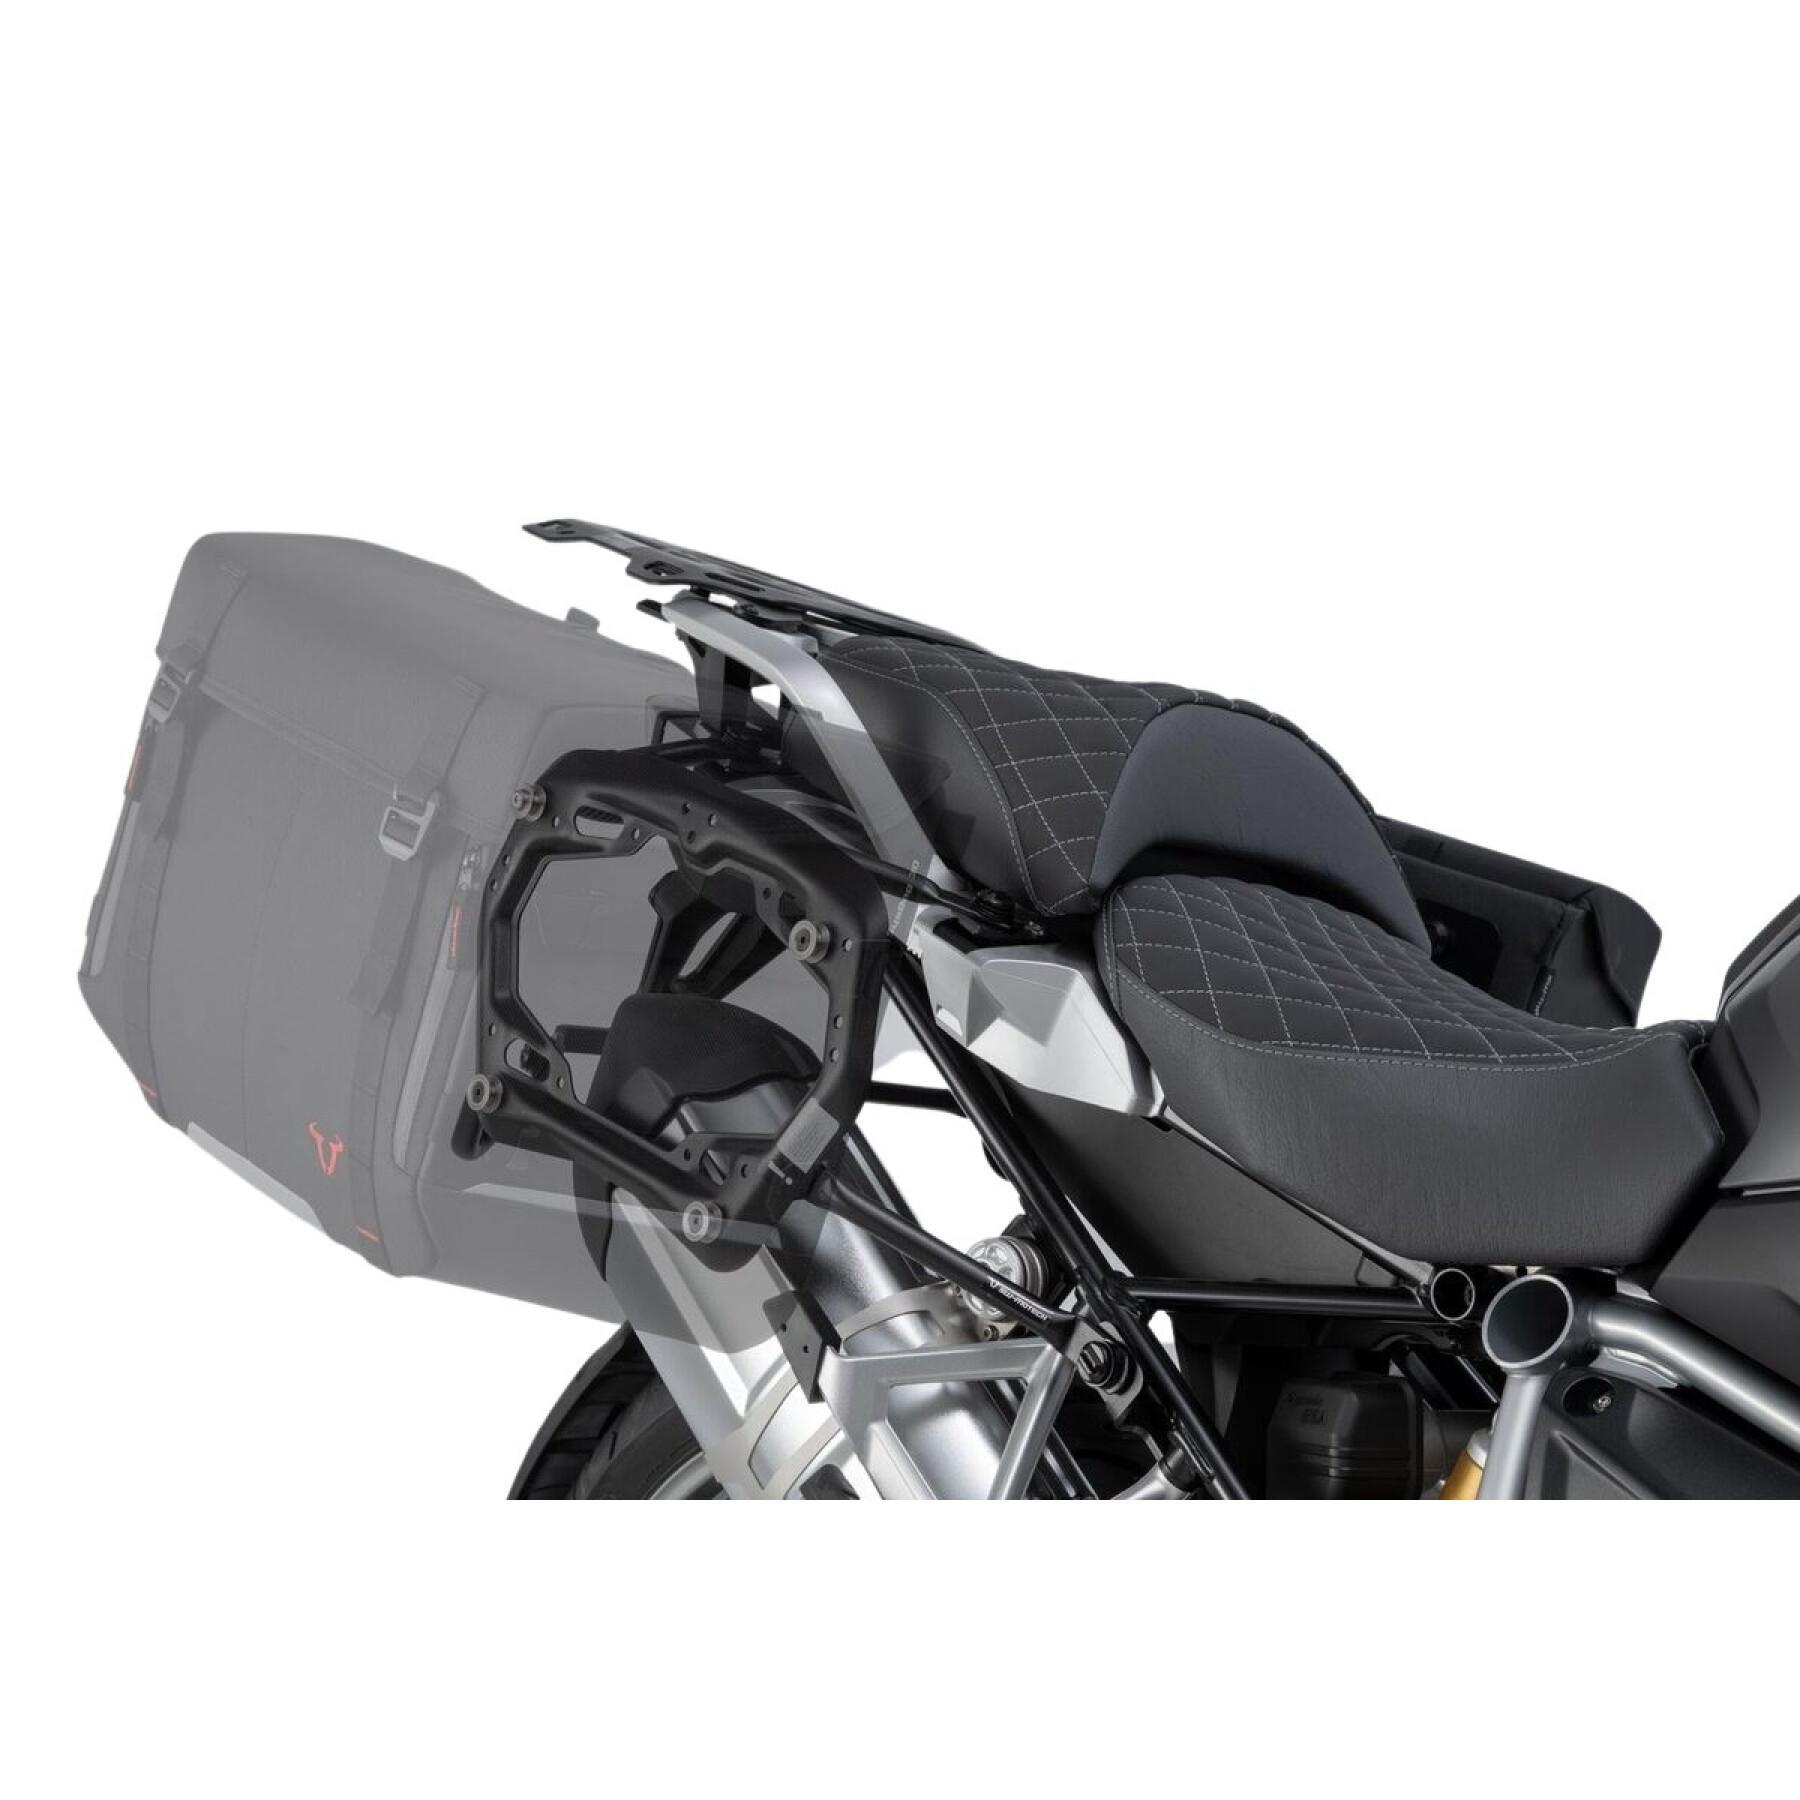 Pair of side cases SW-Motech Sysbag 30/30 Kawasaki KLR650 (08-)